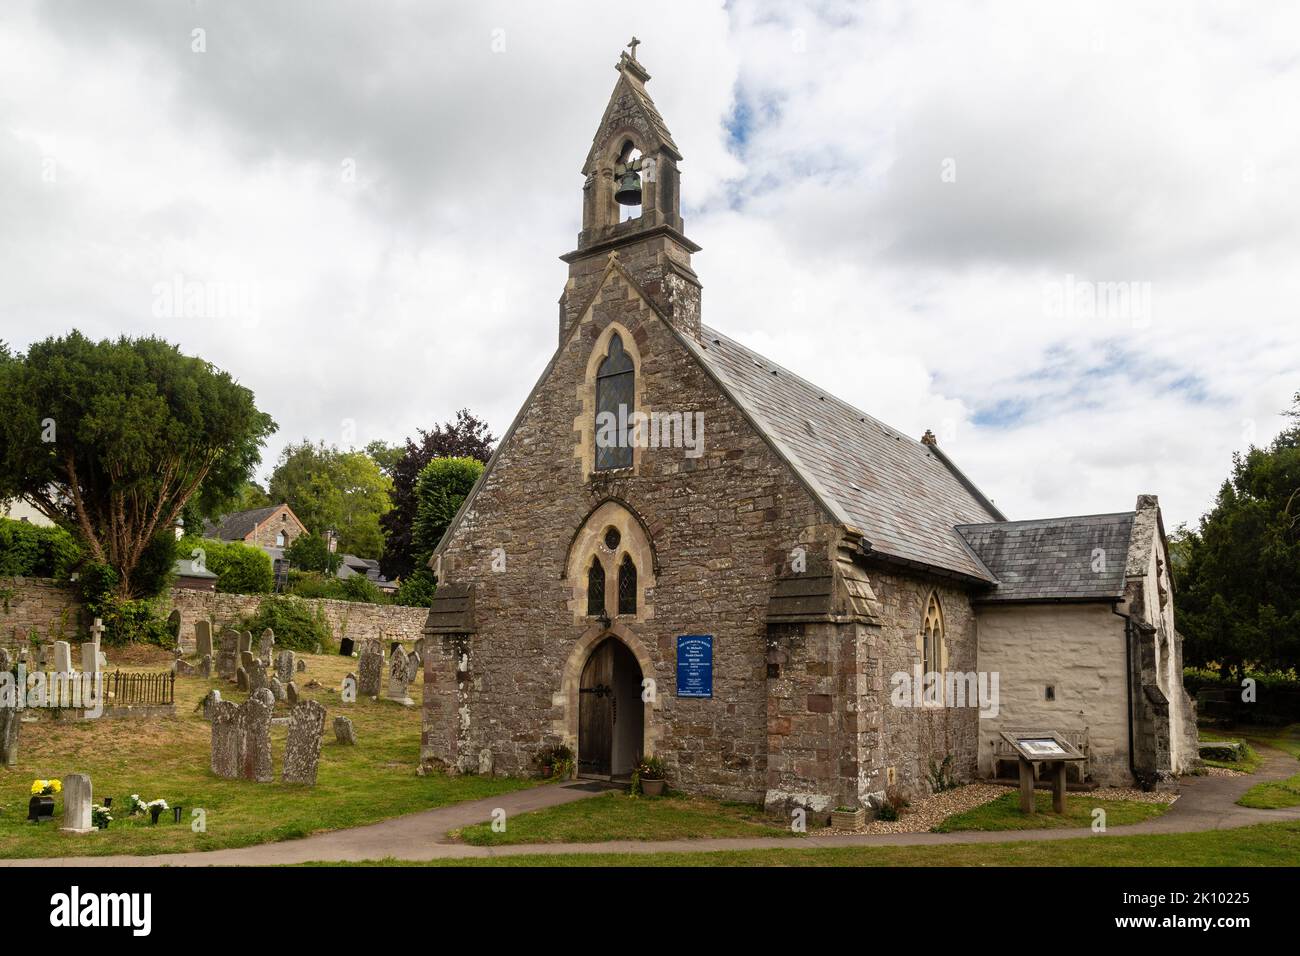 St. Michael's Chruch, Tintern, Monmouthshire, Galles Foto Stock